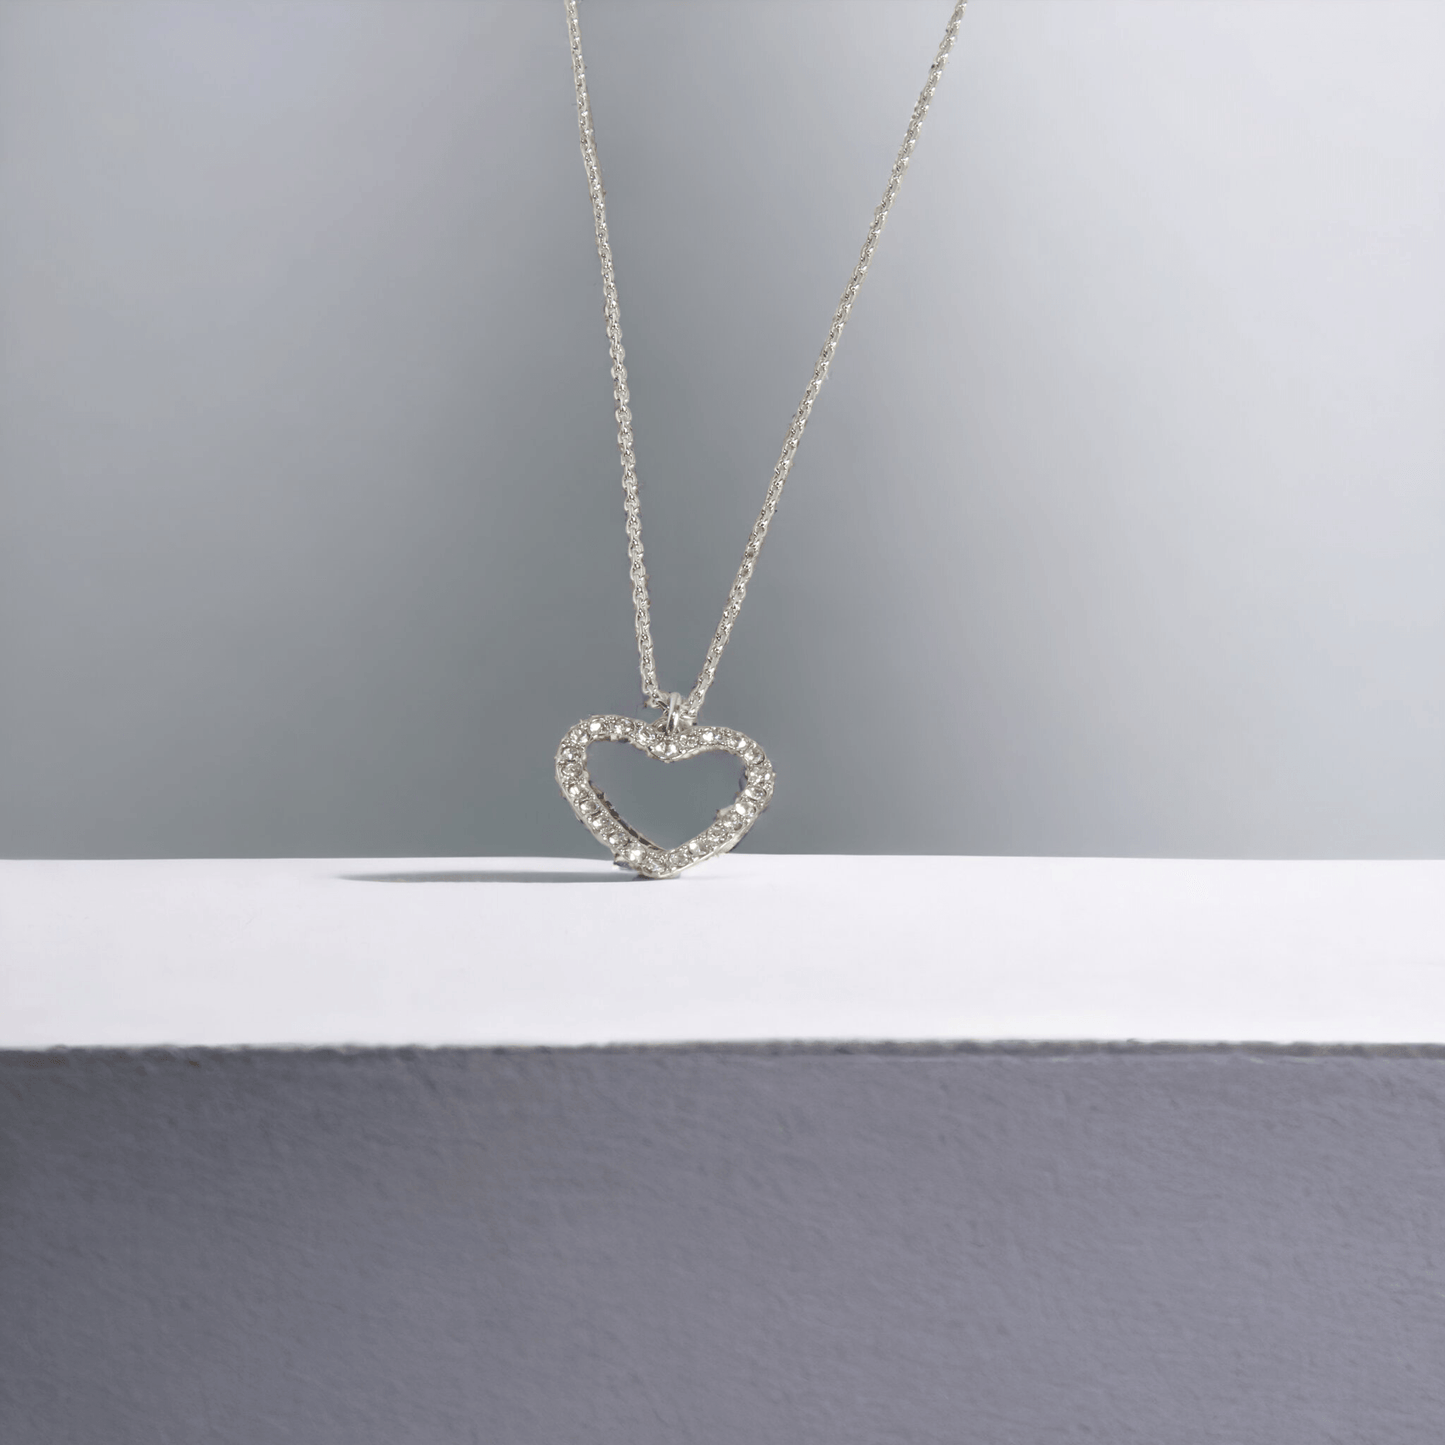 Crystal Heart Necklace - J & S Expressions